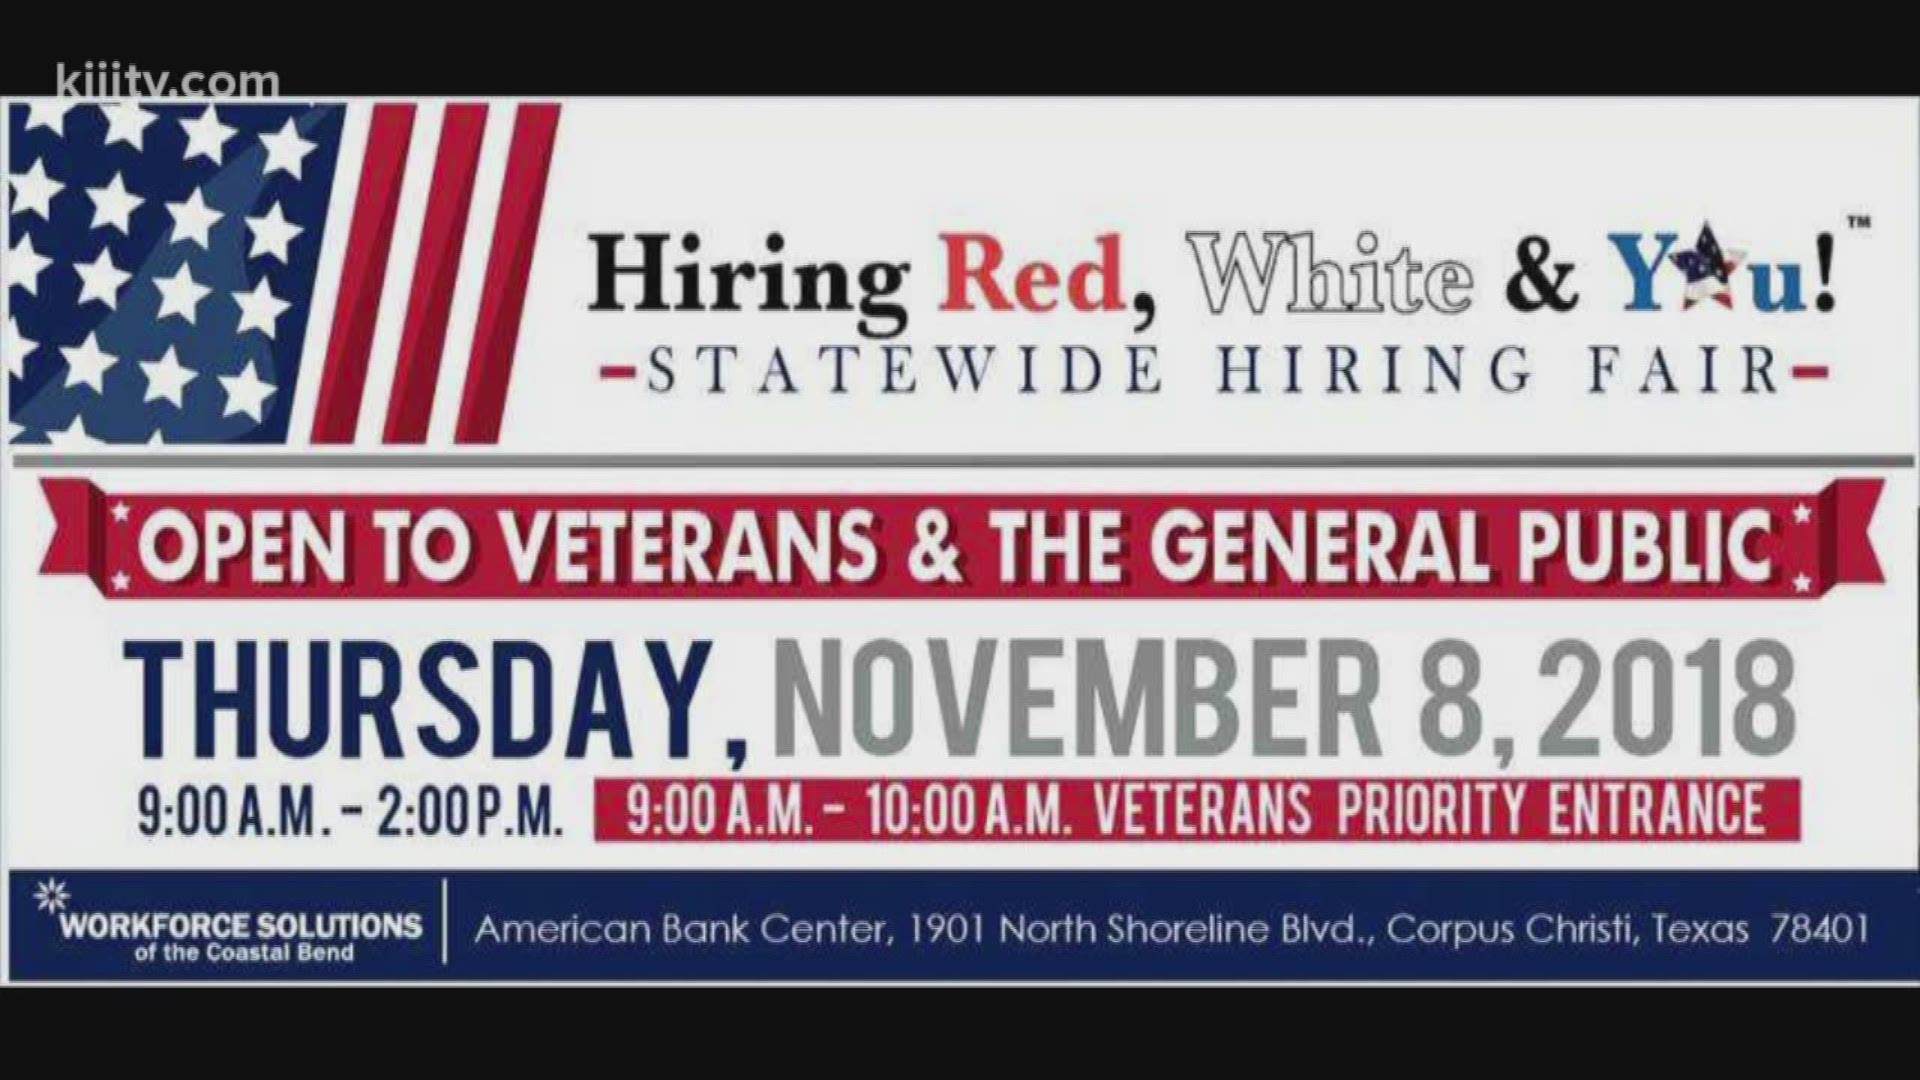 Veterans head over to the American Bank Center Thursday, November 8, 2018 for your chance to interview with 120 employers.